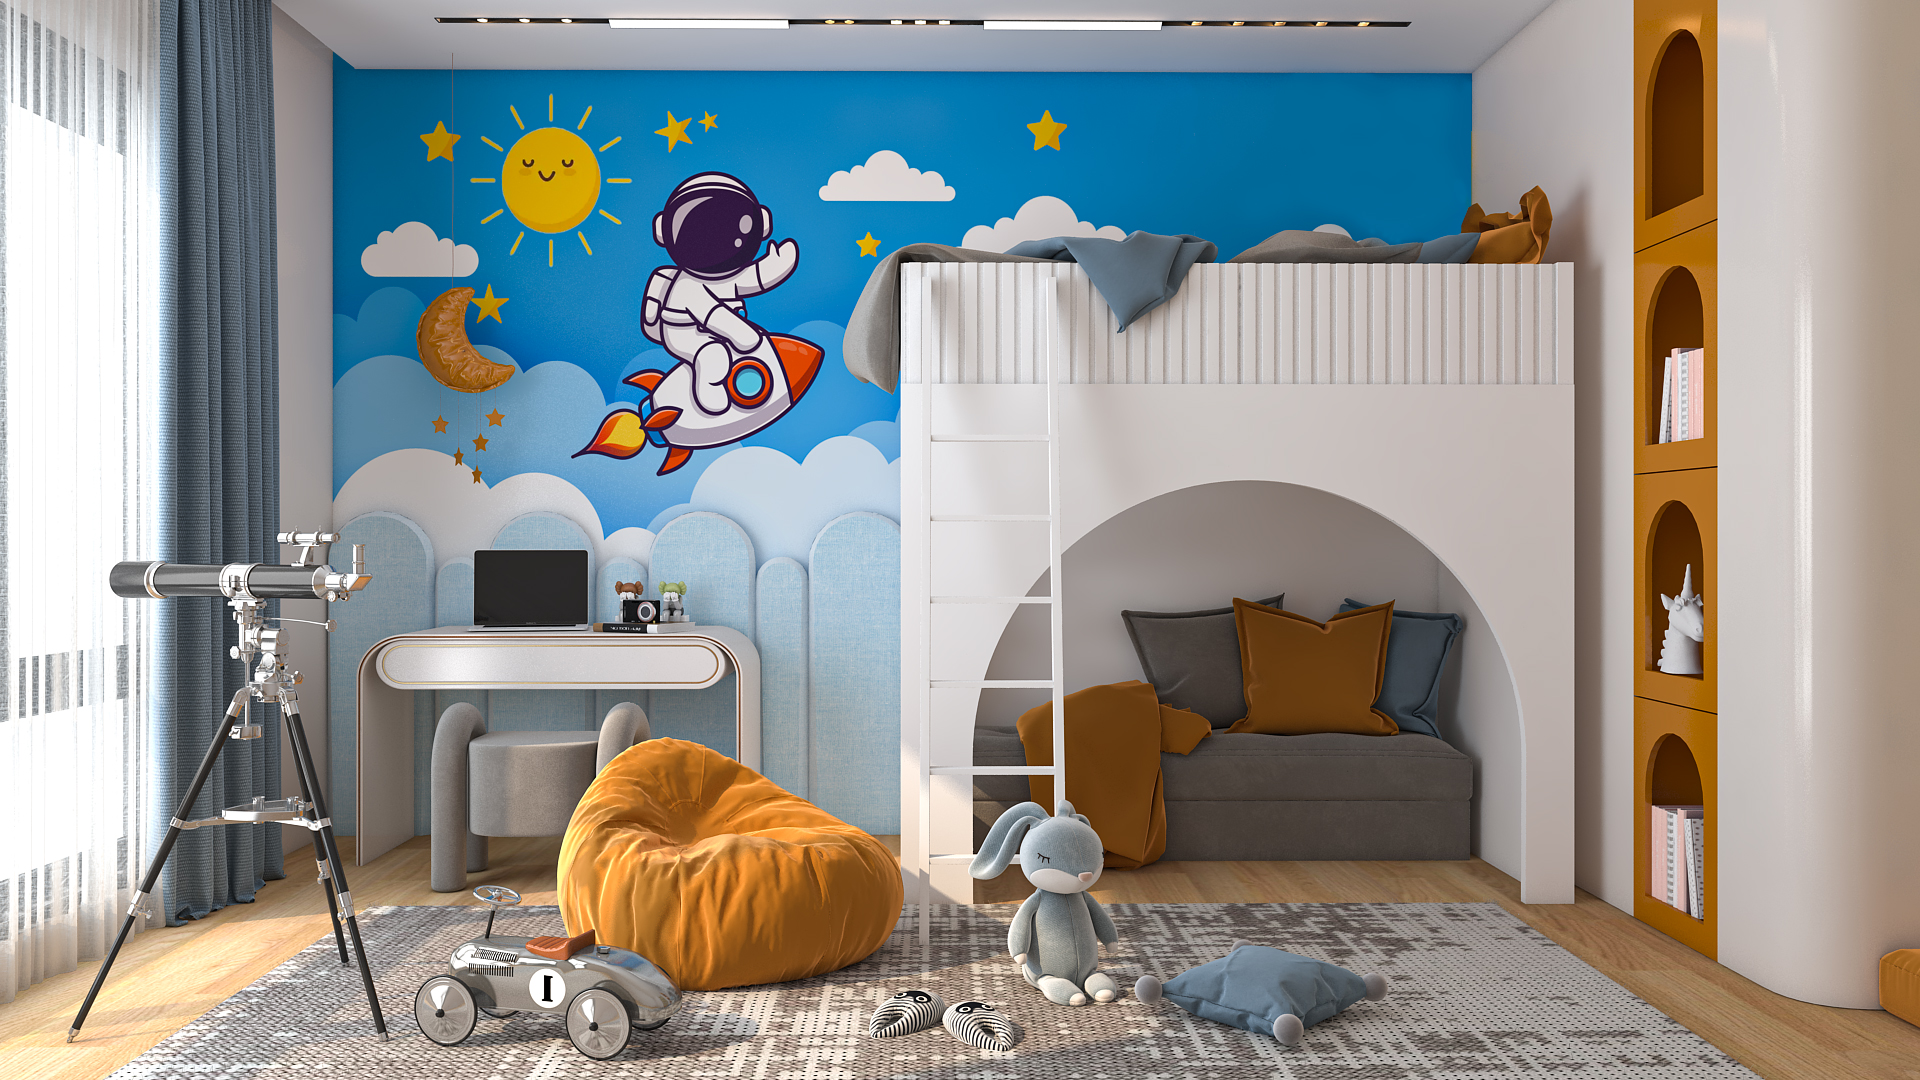 Cozy Kidsroom with Colorful Decor